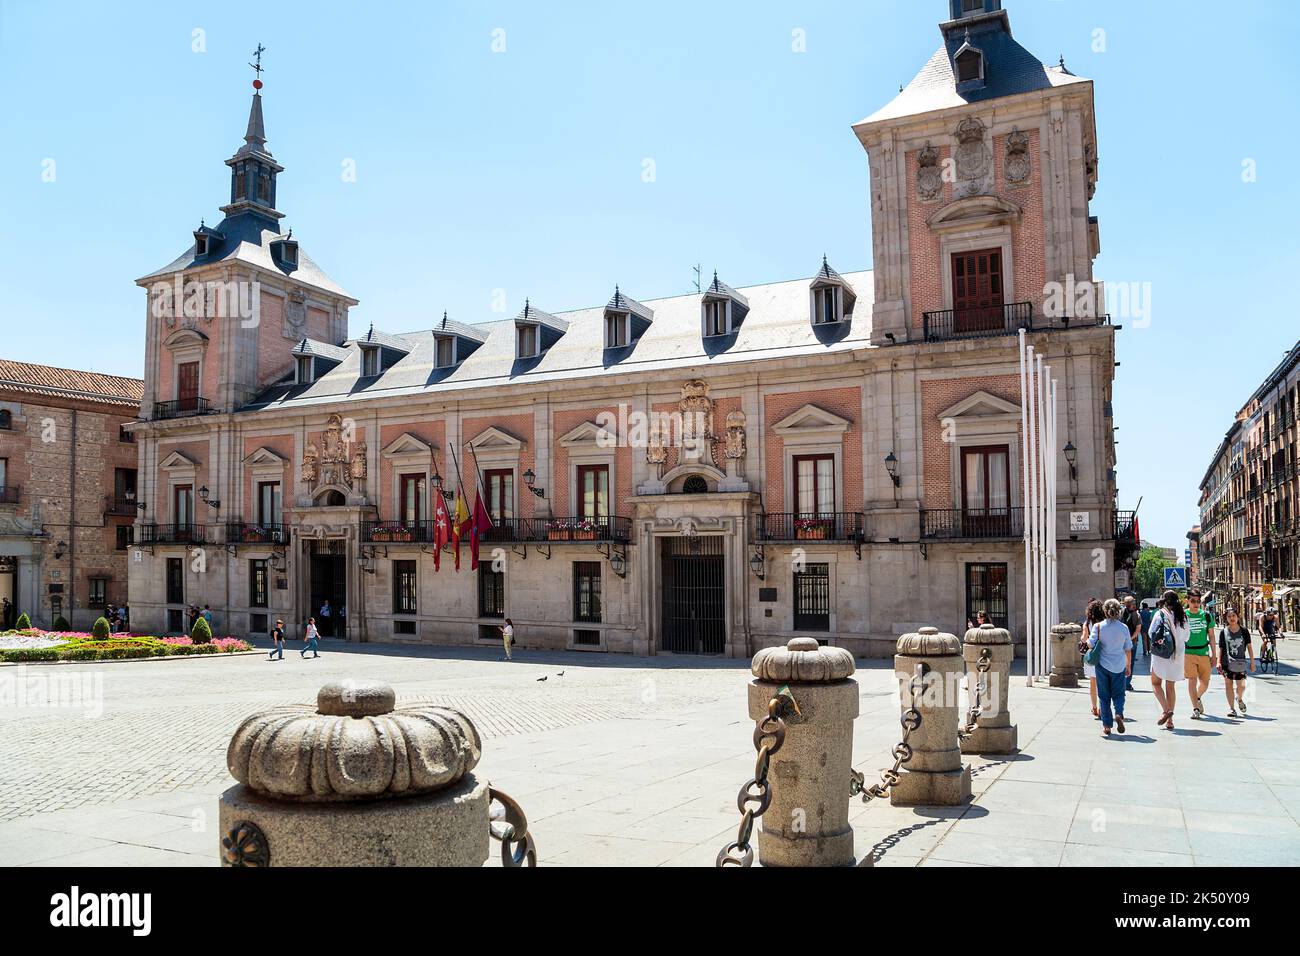 MADRID, SPAIN - MAY 24, 2017: It is the medieval old town hall in the Place de la Villa. Stock Photo